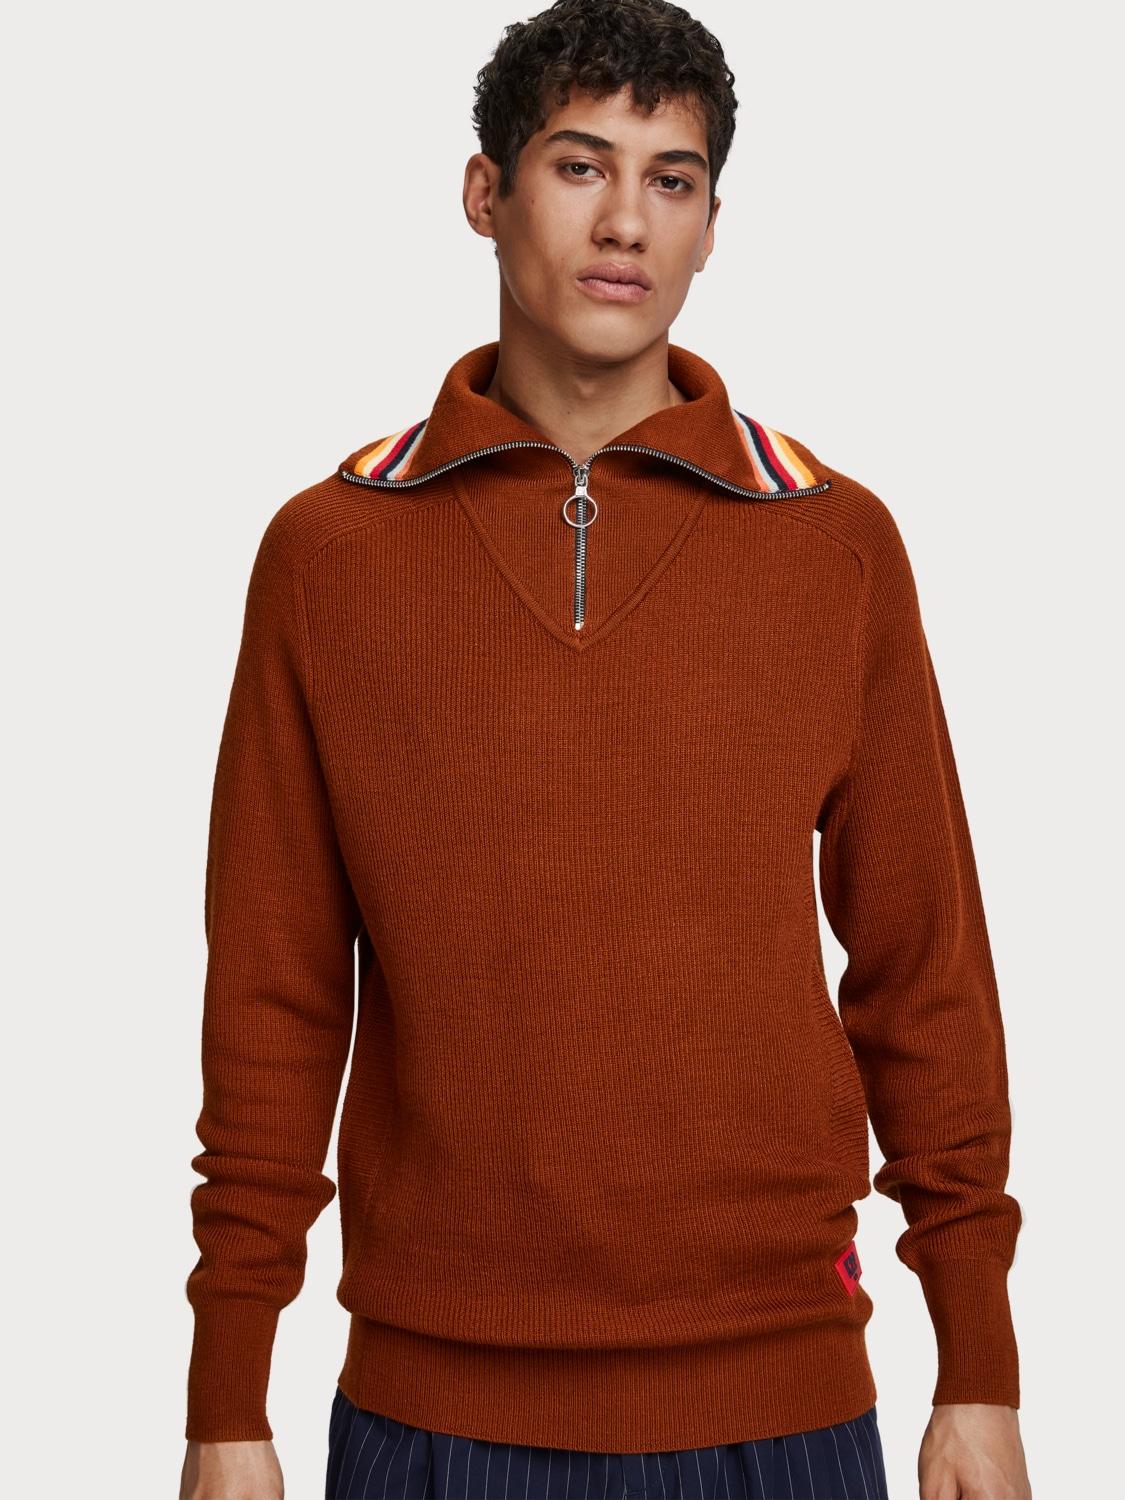 Scotch & Soda Wool Zip-up Collar Sweater in Brown for Men - Lyst